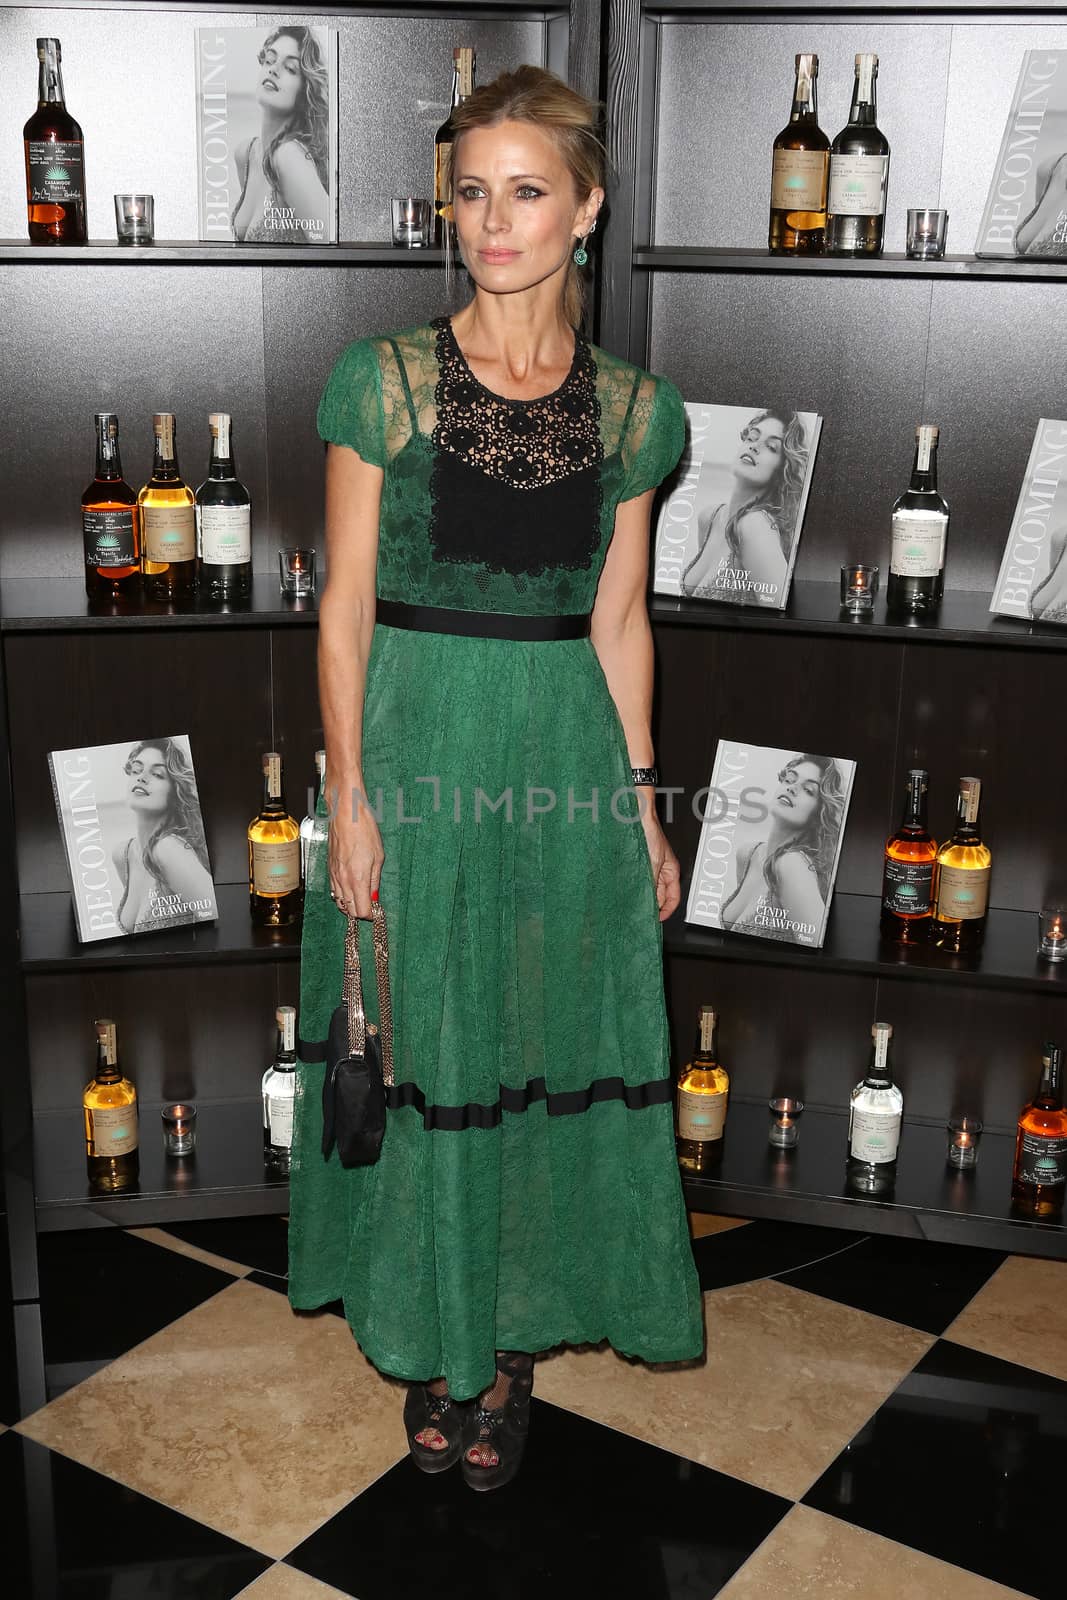 UNITED KINGDOM, London: Laura Bailey attends the joint launch of George Clooney's new tequila label, Casamigos Tequila, and Cindy Crawford's new book Becoming at the Beaumont Hotel in central London on October 1, 2015. 